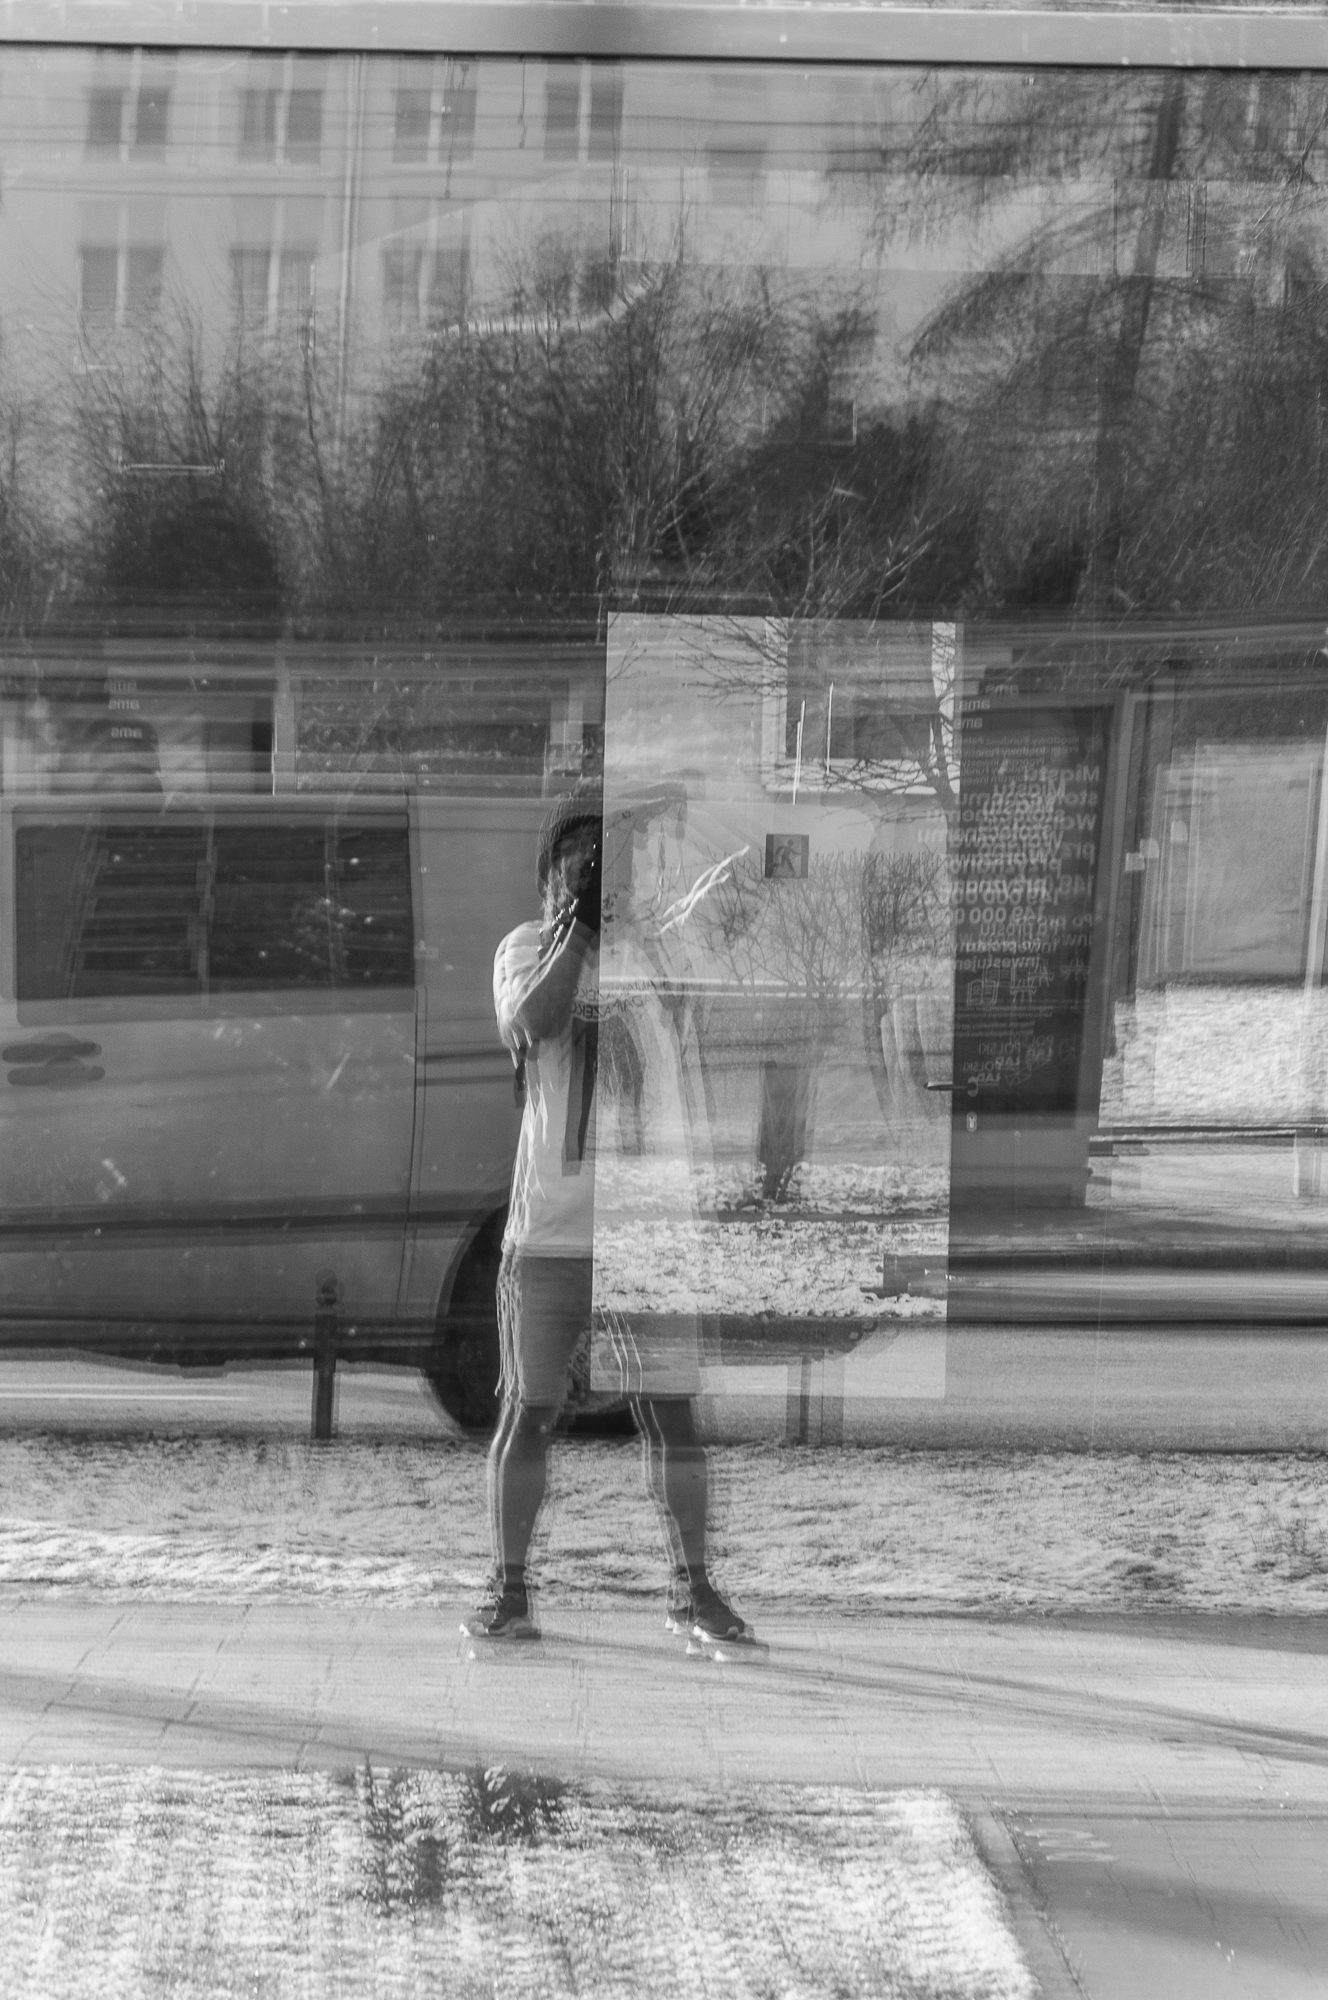 Adam Mazek Photography 2022. Warsaw Street Photography. Post: "Music albums for walking in the cold." Minimalism. Selfie.